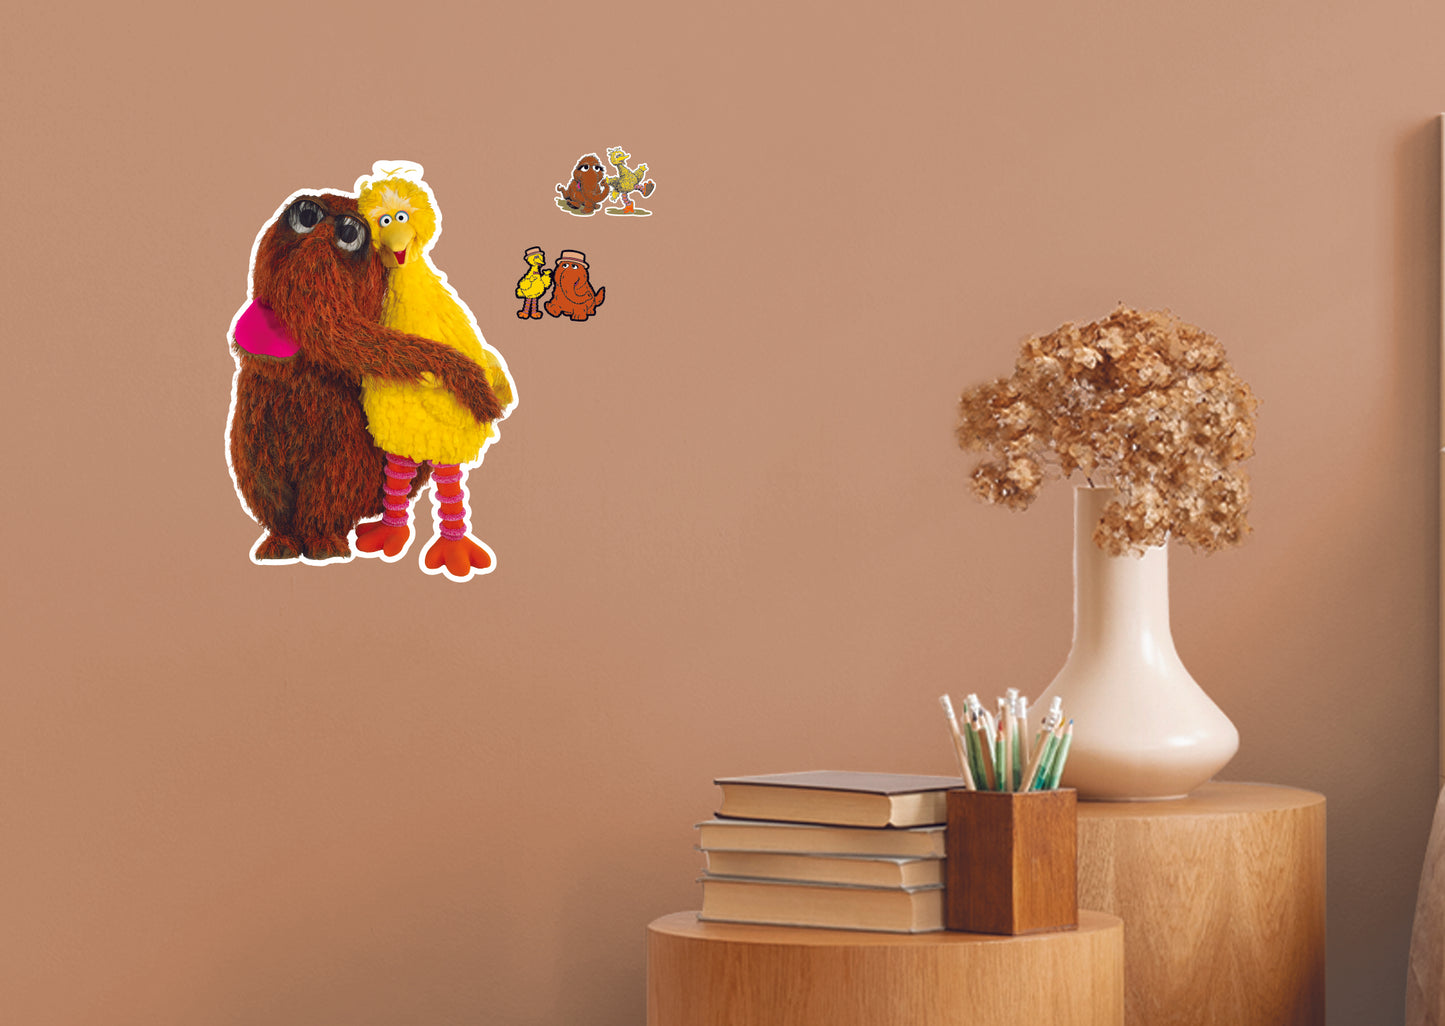 Snuffleupagus and Big Bird RealBig        - Officially Licensed Sesame Street Removable     Adhesive Decal